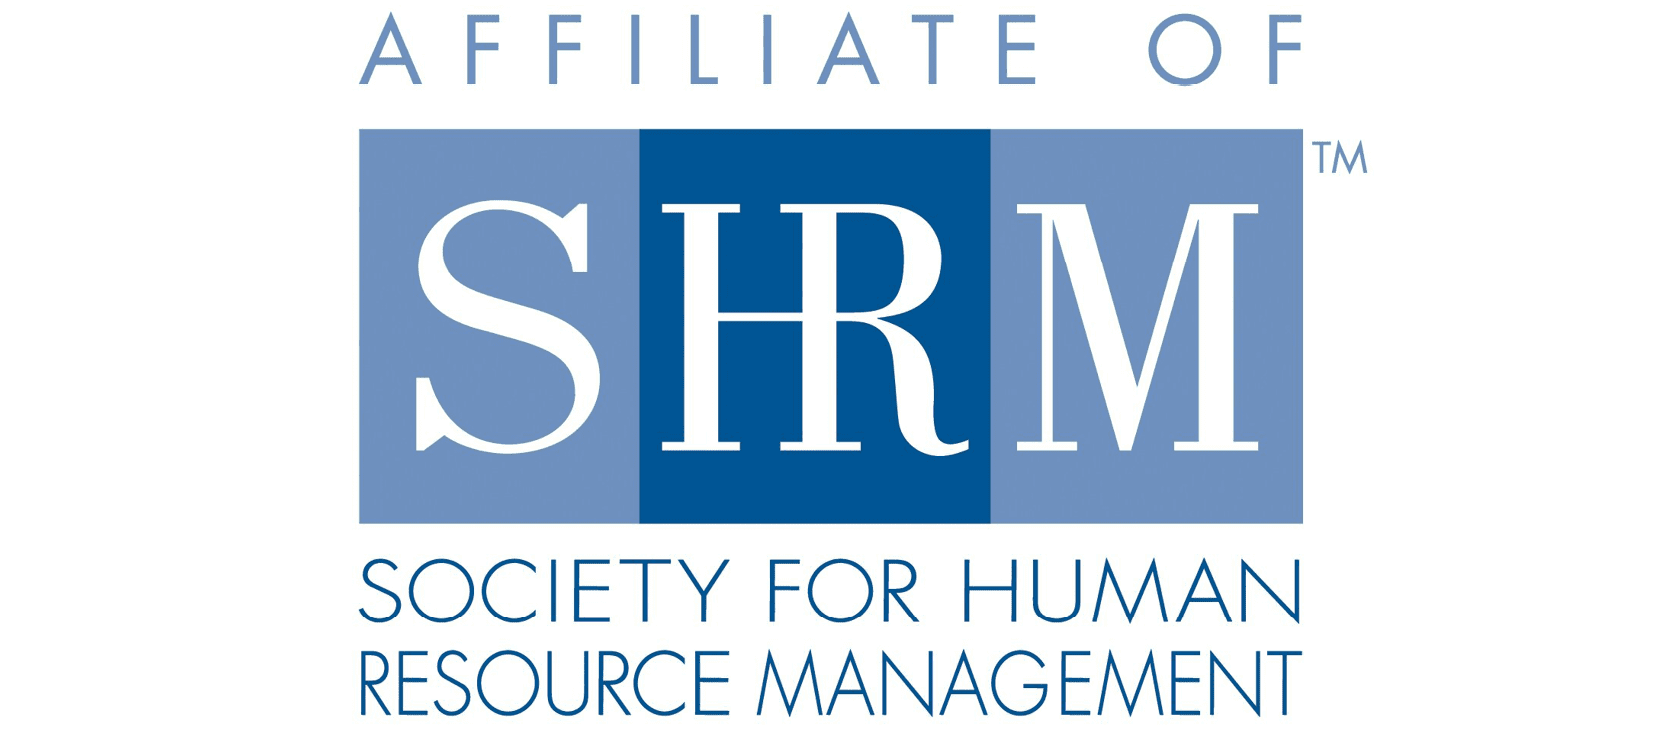 Cypress Employment Society For Human Resource Management Affiliate